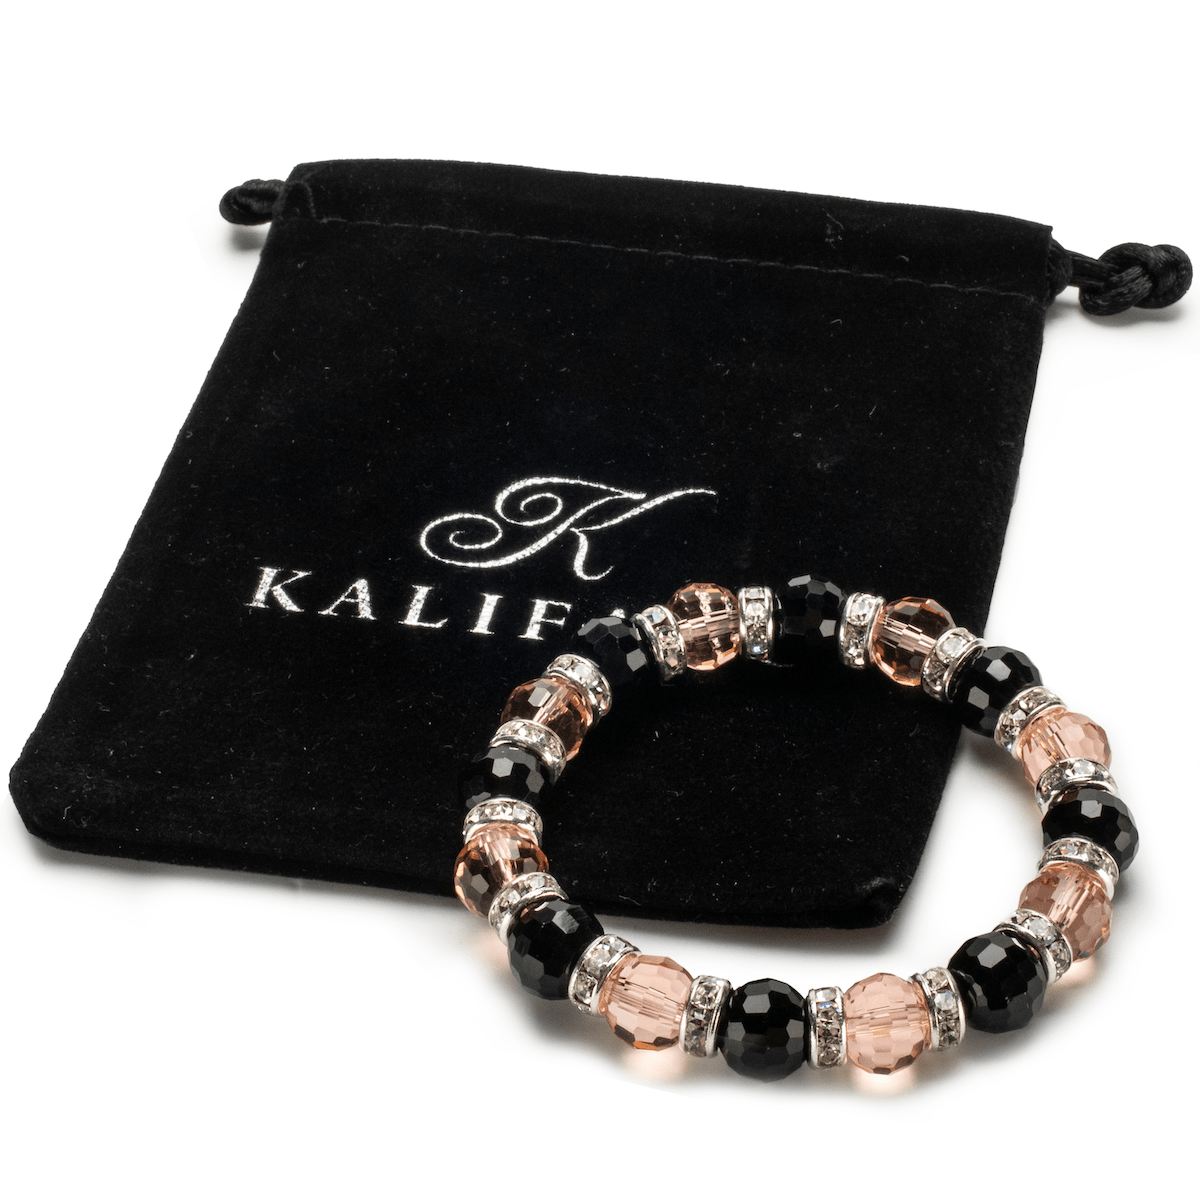 Kalifano Gorgeous Glass Jewelry Multicolored Gorgeous Glass Bracelet with Cubic Zirconia Crystals BLUE-BGG-N15